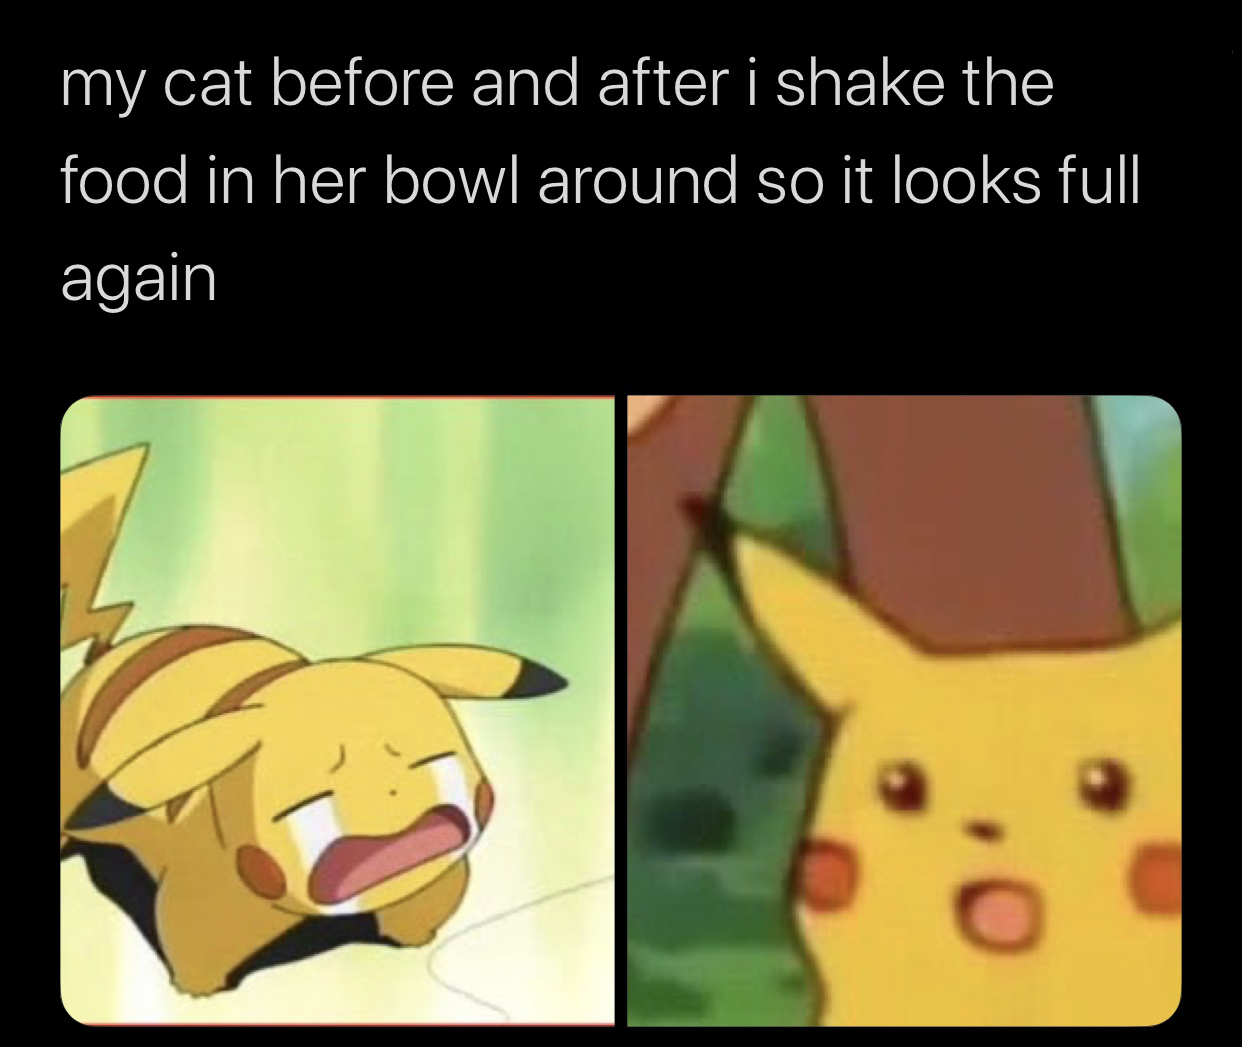 my cat before and after i shake the food in her bowl around so it looks full again